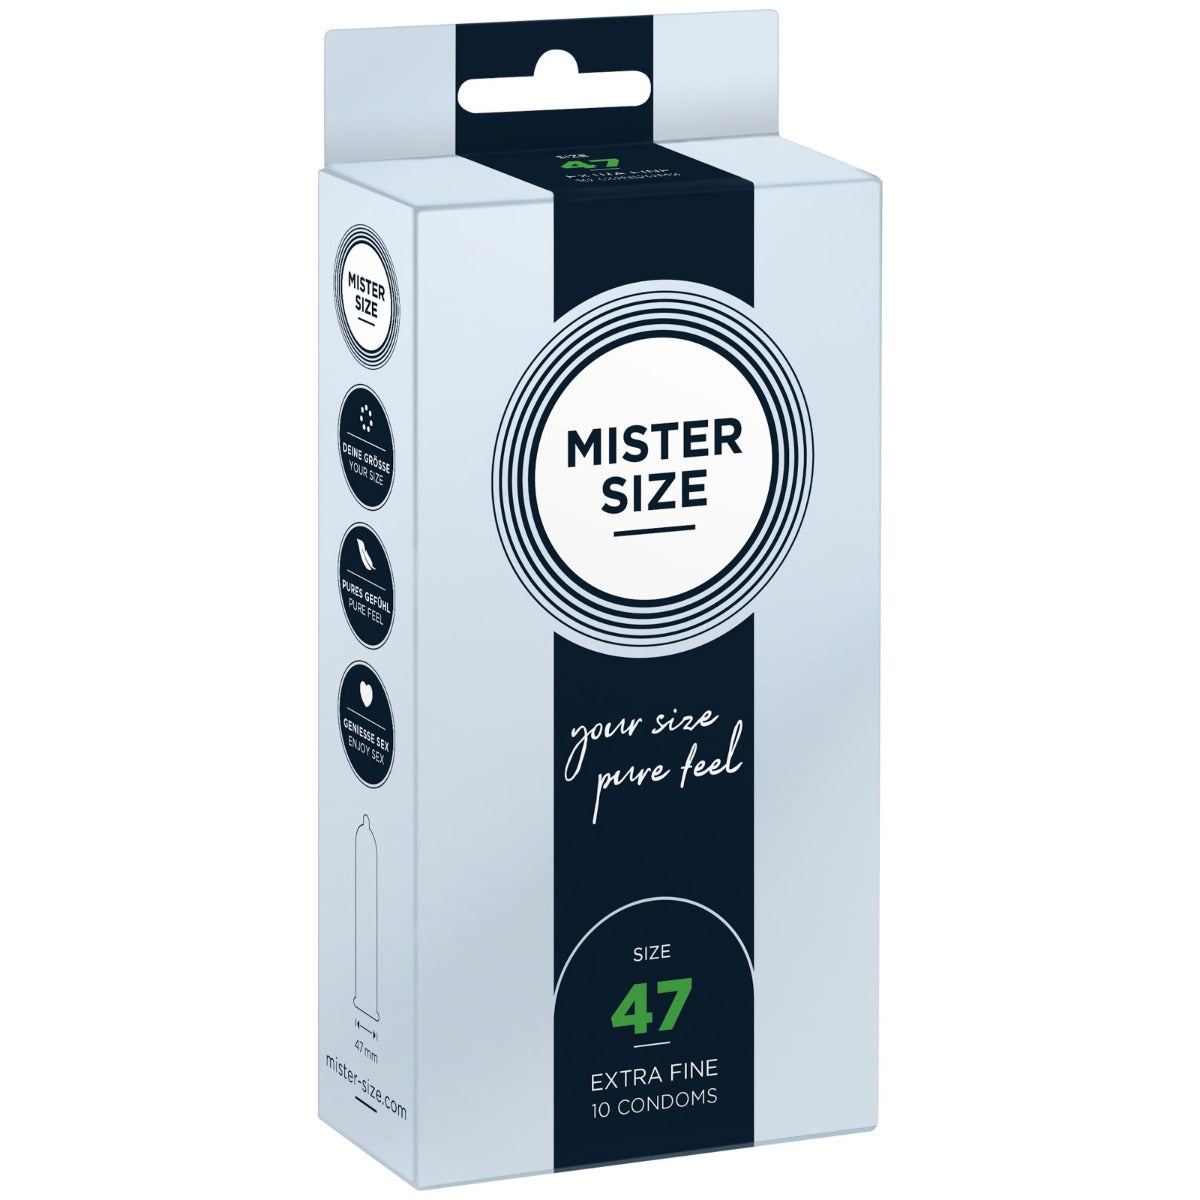 MISTER SIZE | Pure feel Condoms - size 47 mm (10 pack)